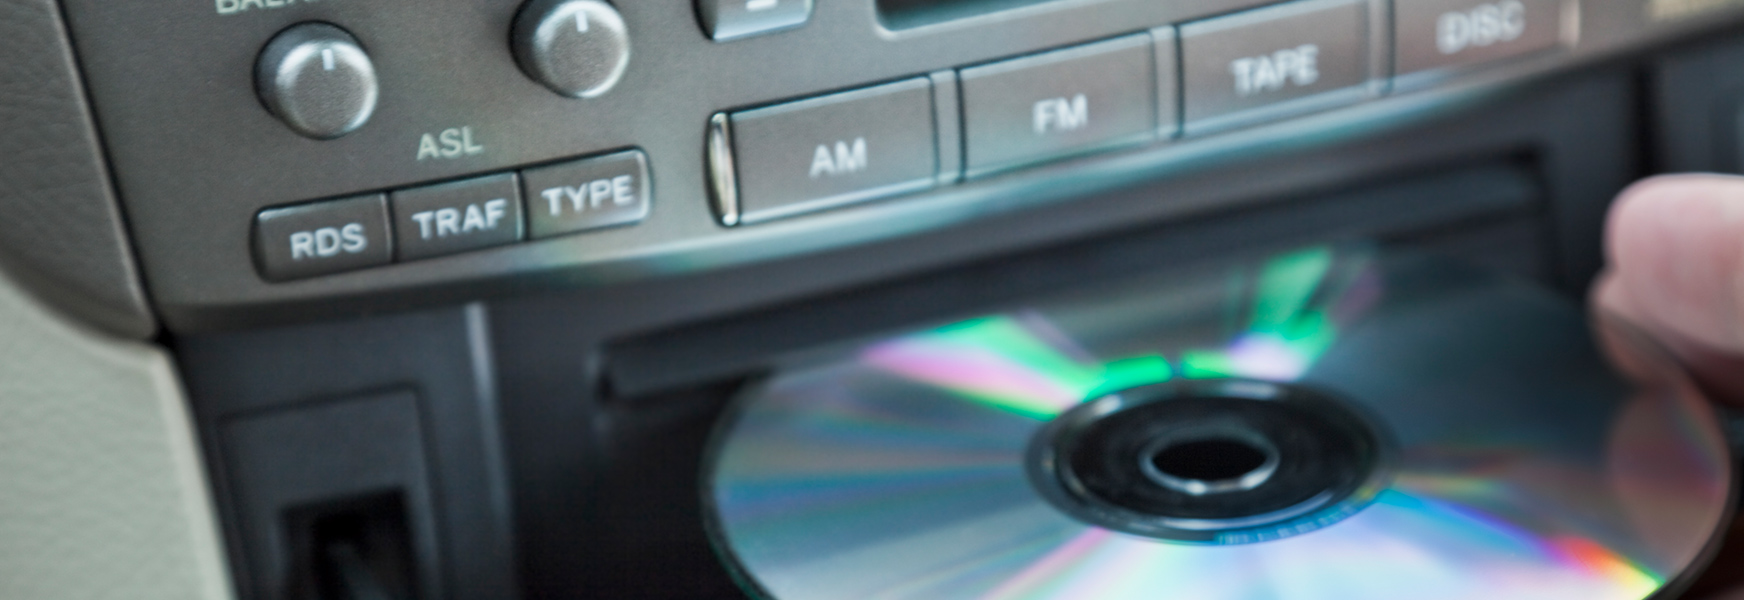 Music CD being loaded into CD player